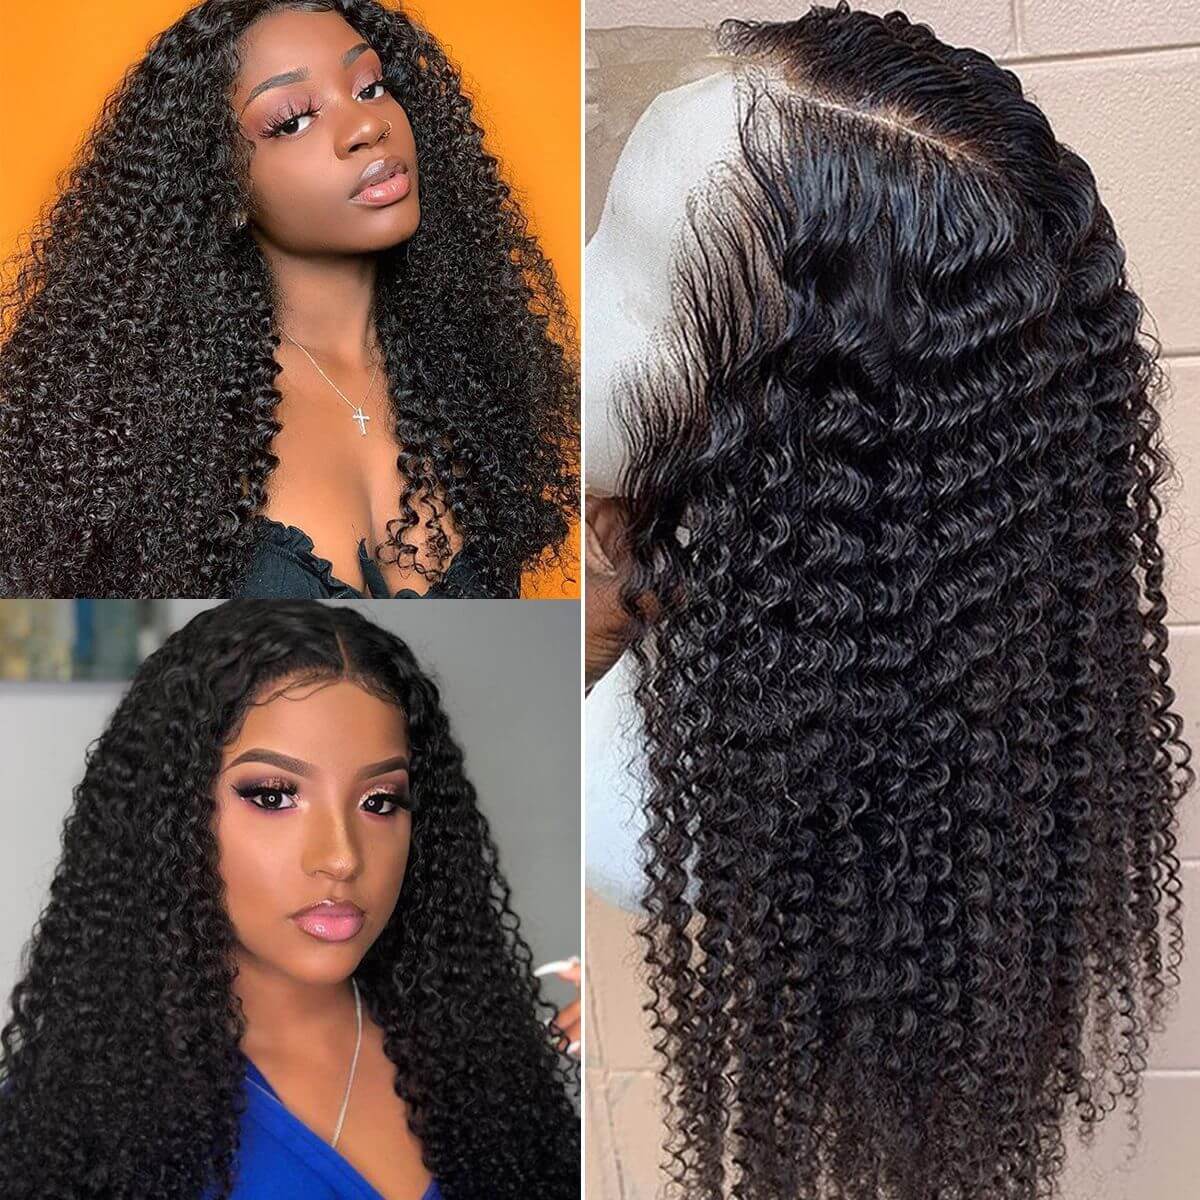 curly hair full lace wig,curly hair full wig,full lace curly wig,curly full lace wig,water full lace human wig,lace full curly hair wig